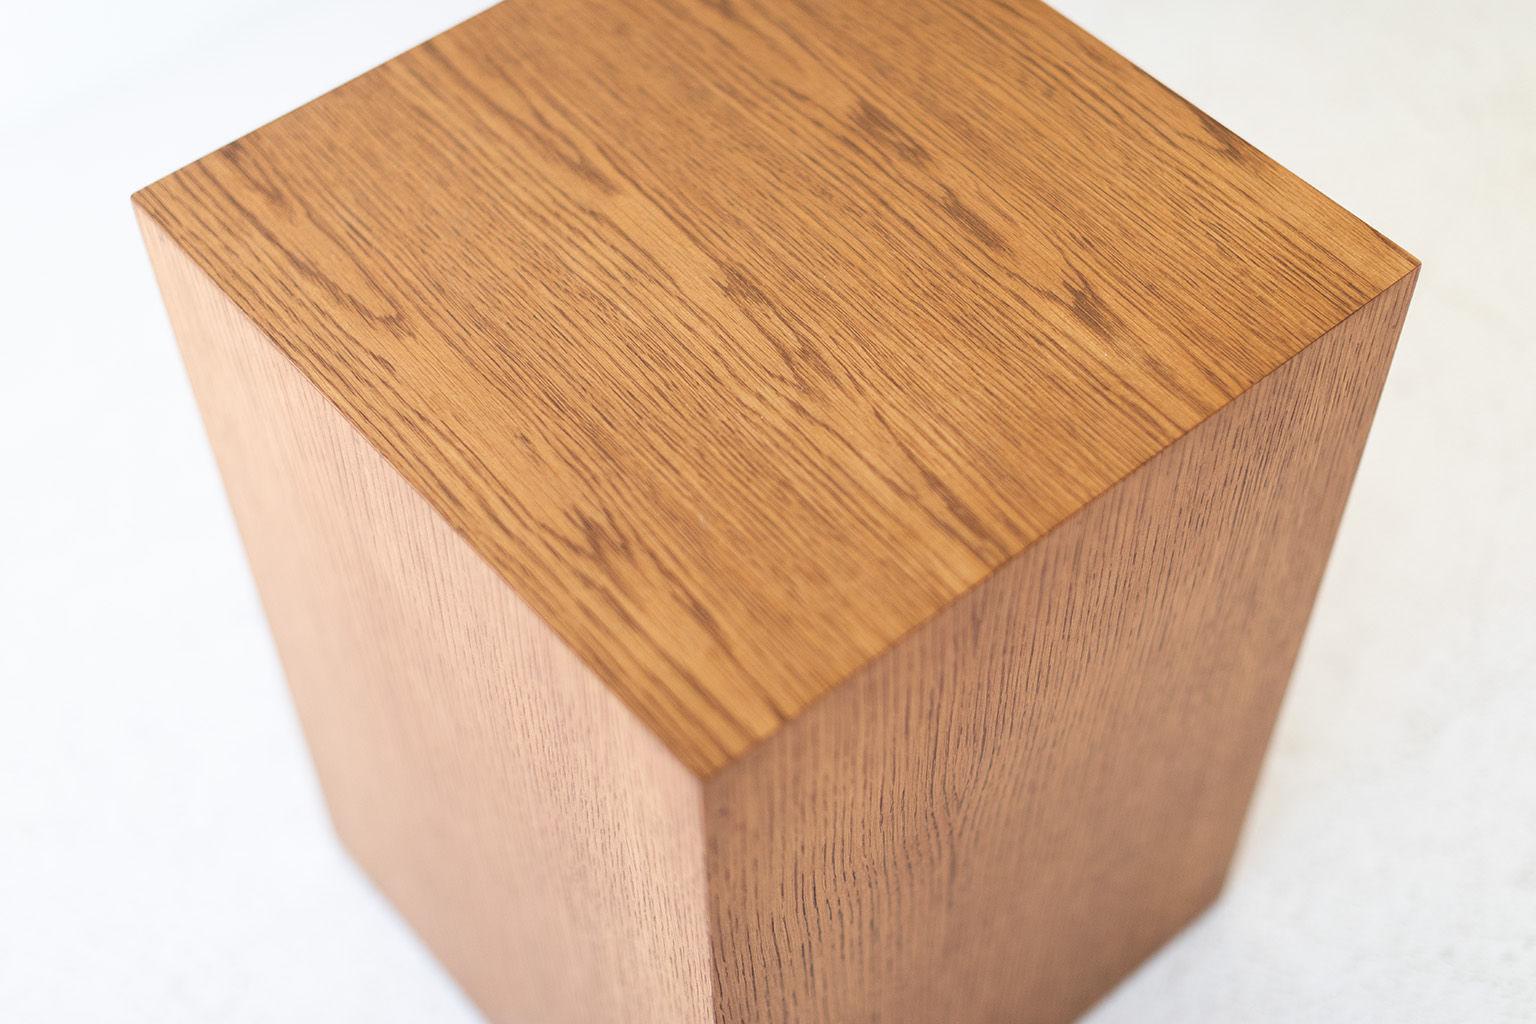 This modern wood side table in oak is made in the heart of Ohio with locally sourced wood. Each table is a hand-made mitered box from white oak veneer and finished with a beautiful matte commercial-grade finish. These are made to order so you can